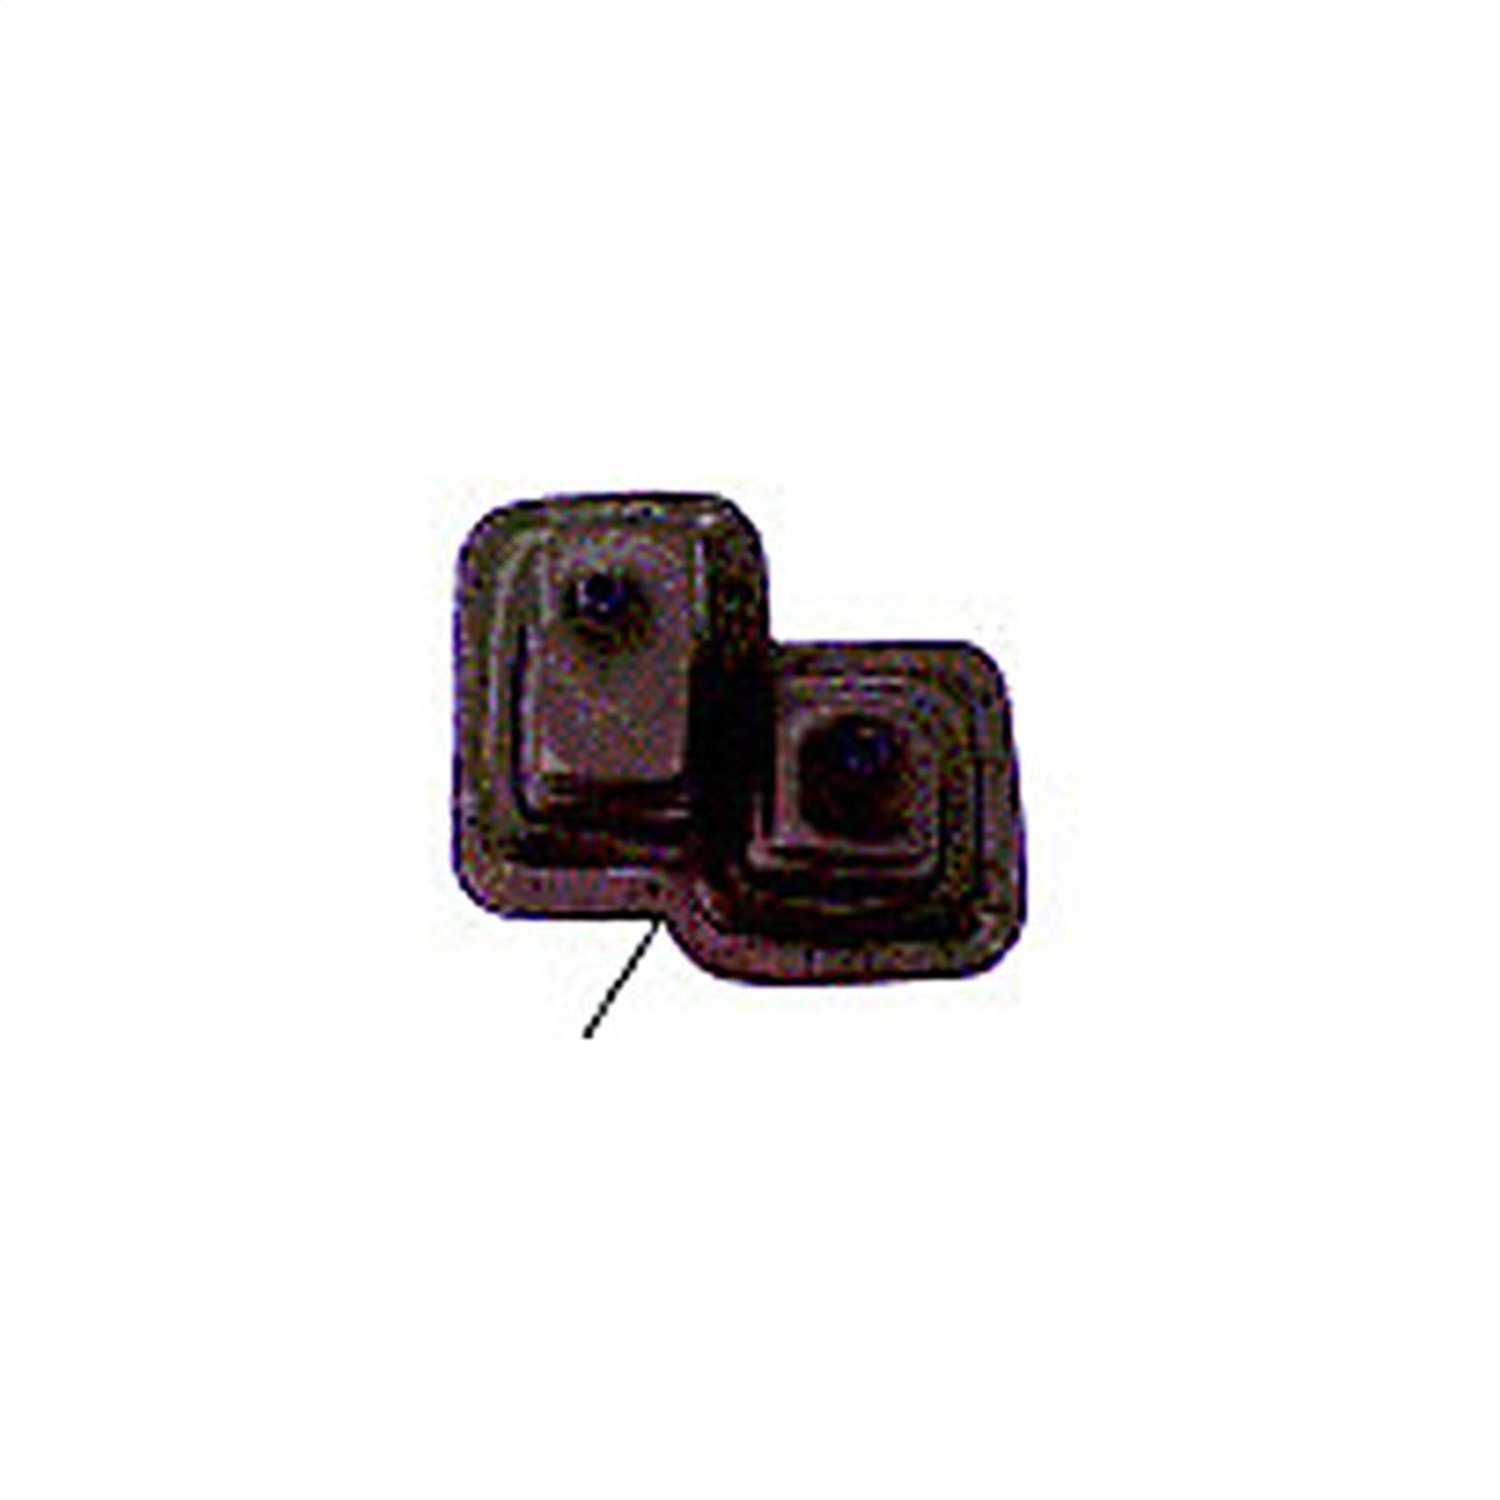 Replacement shifter boot from Omix-ADA, Fits Jeep CJ models with a T-176 or T-177 transmission a